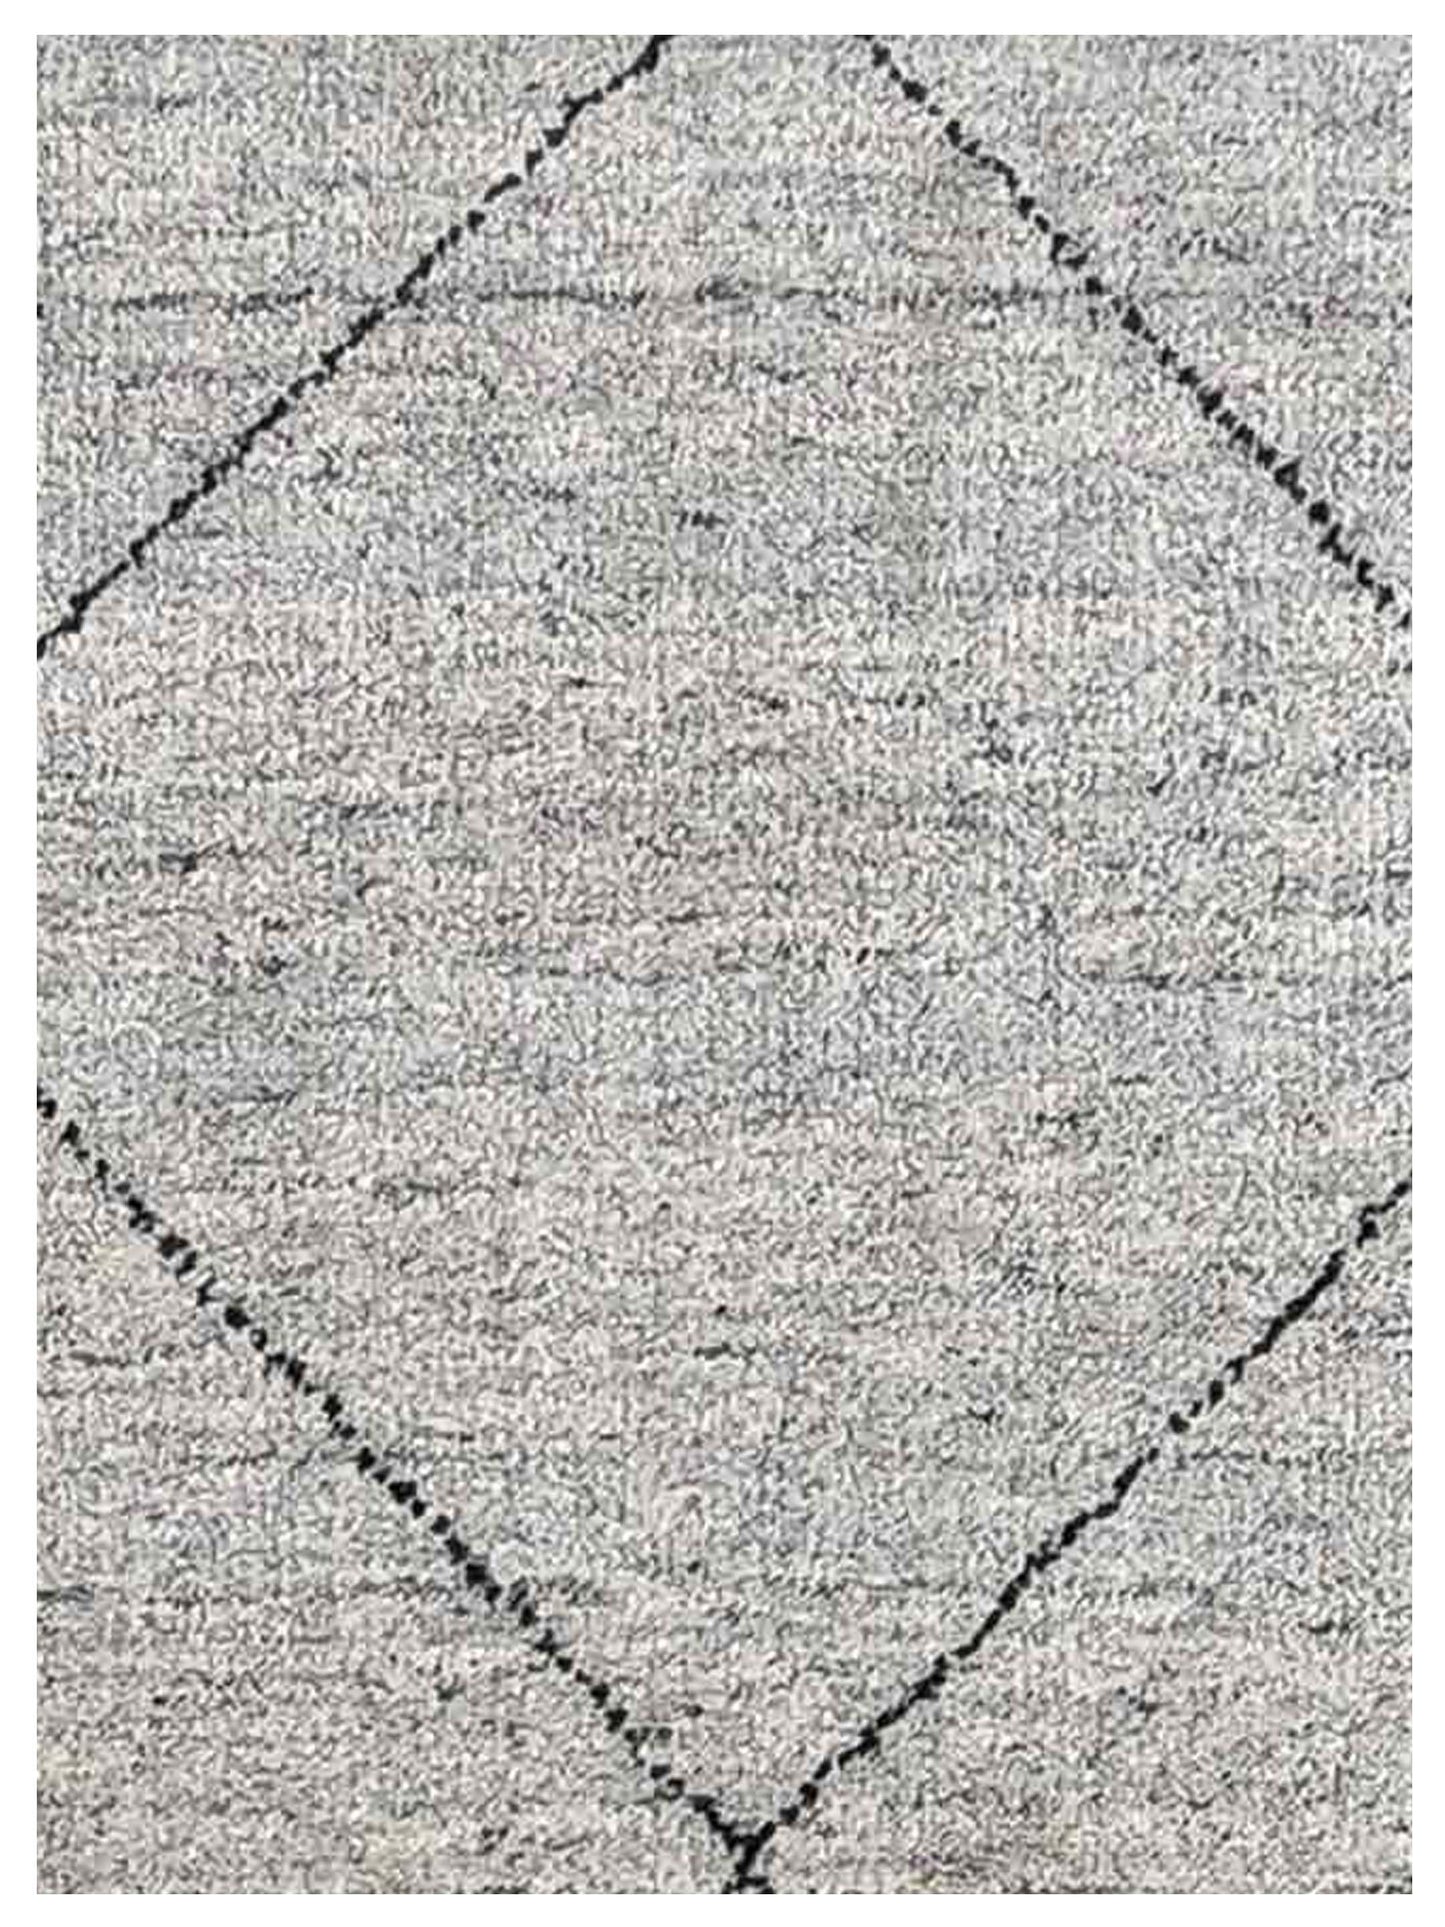 Artisan Marion  Silver  Transitional Knotted Rug